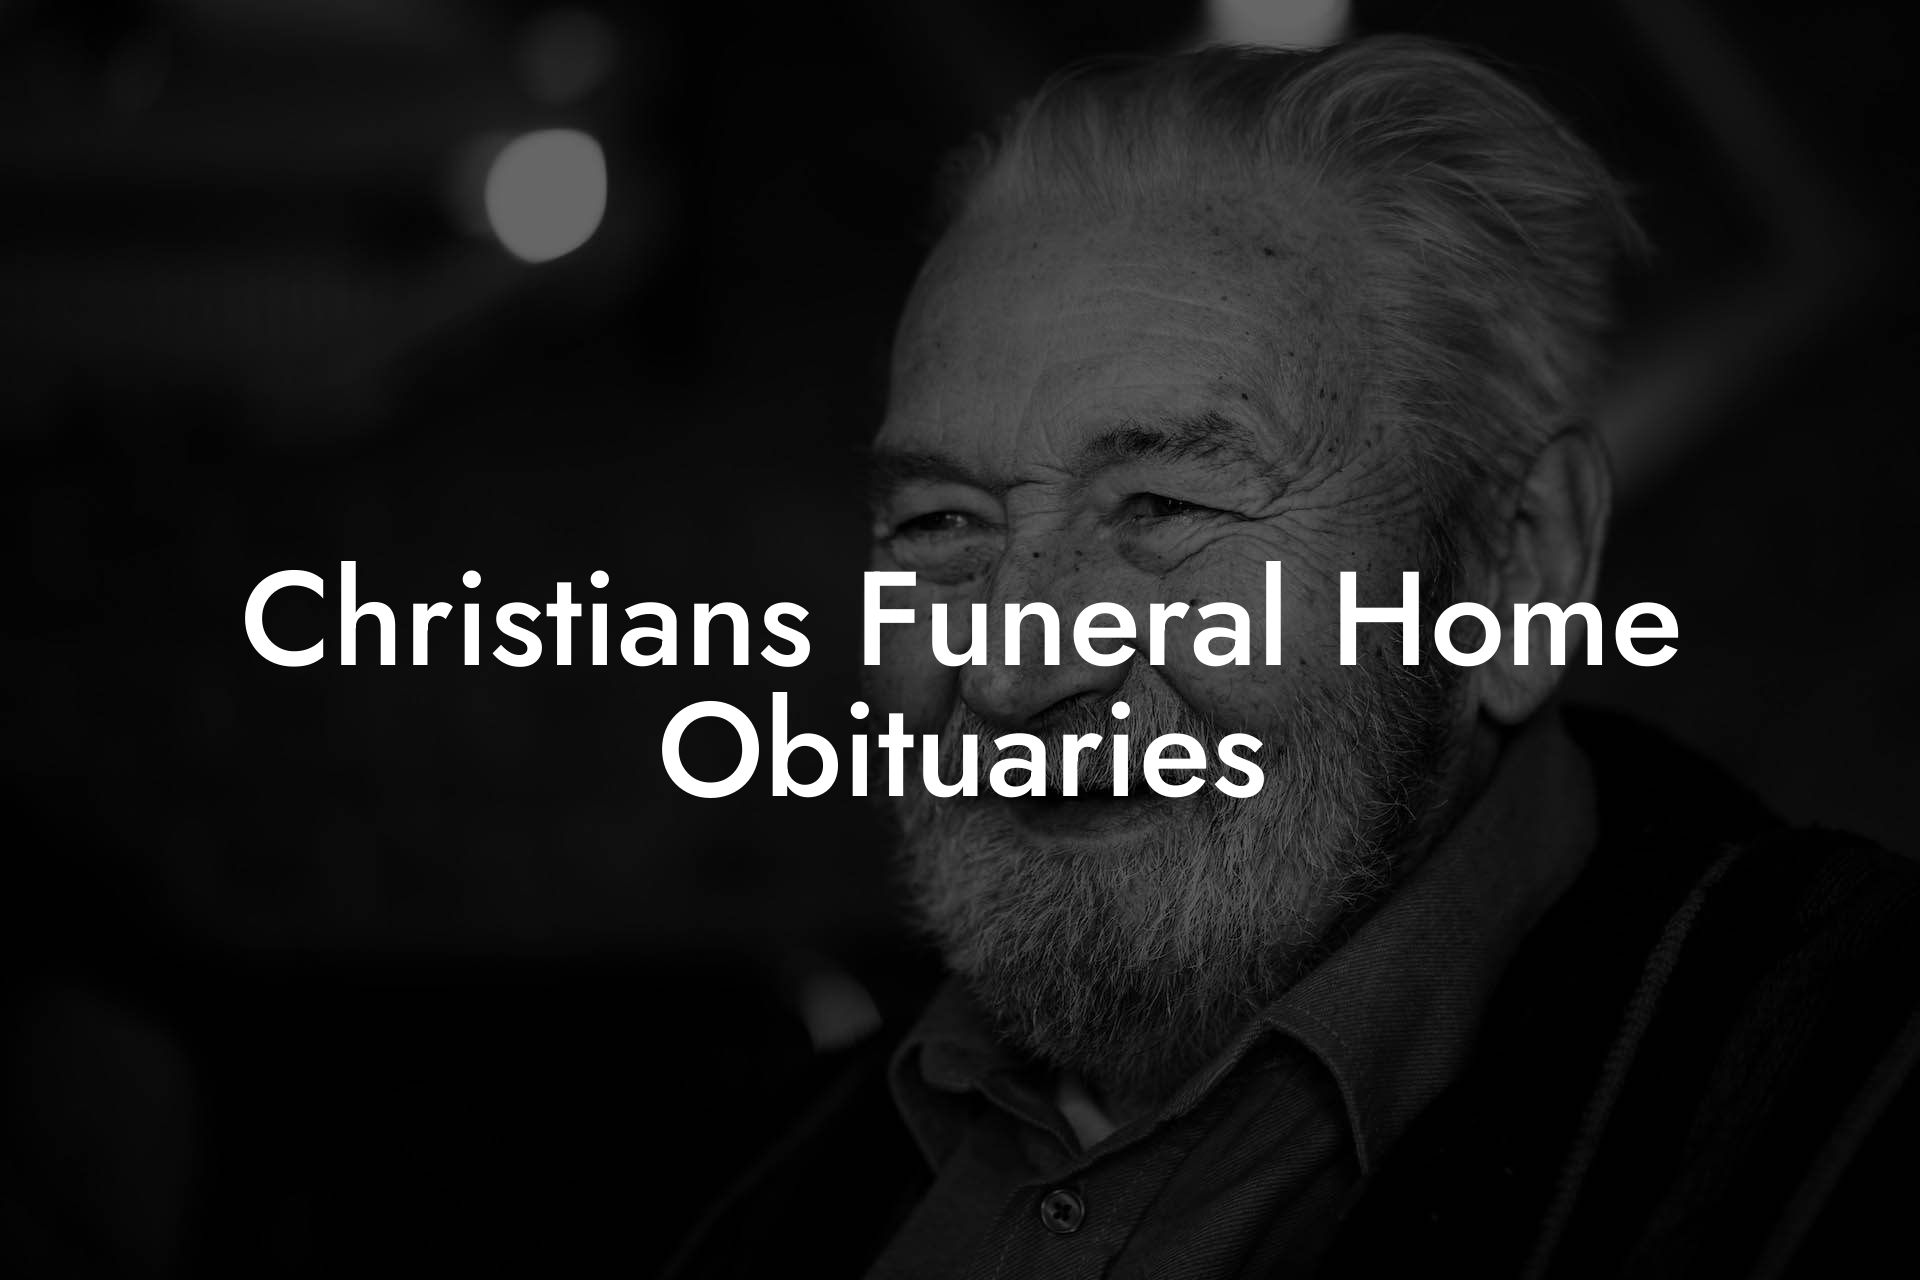 Christians Funeral Home Obituaries